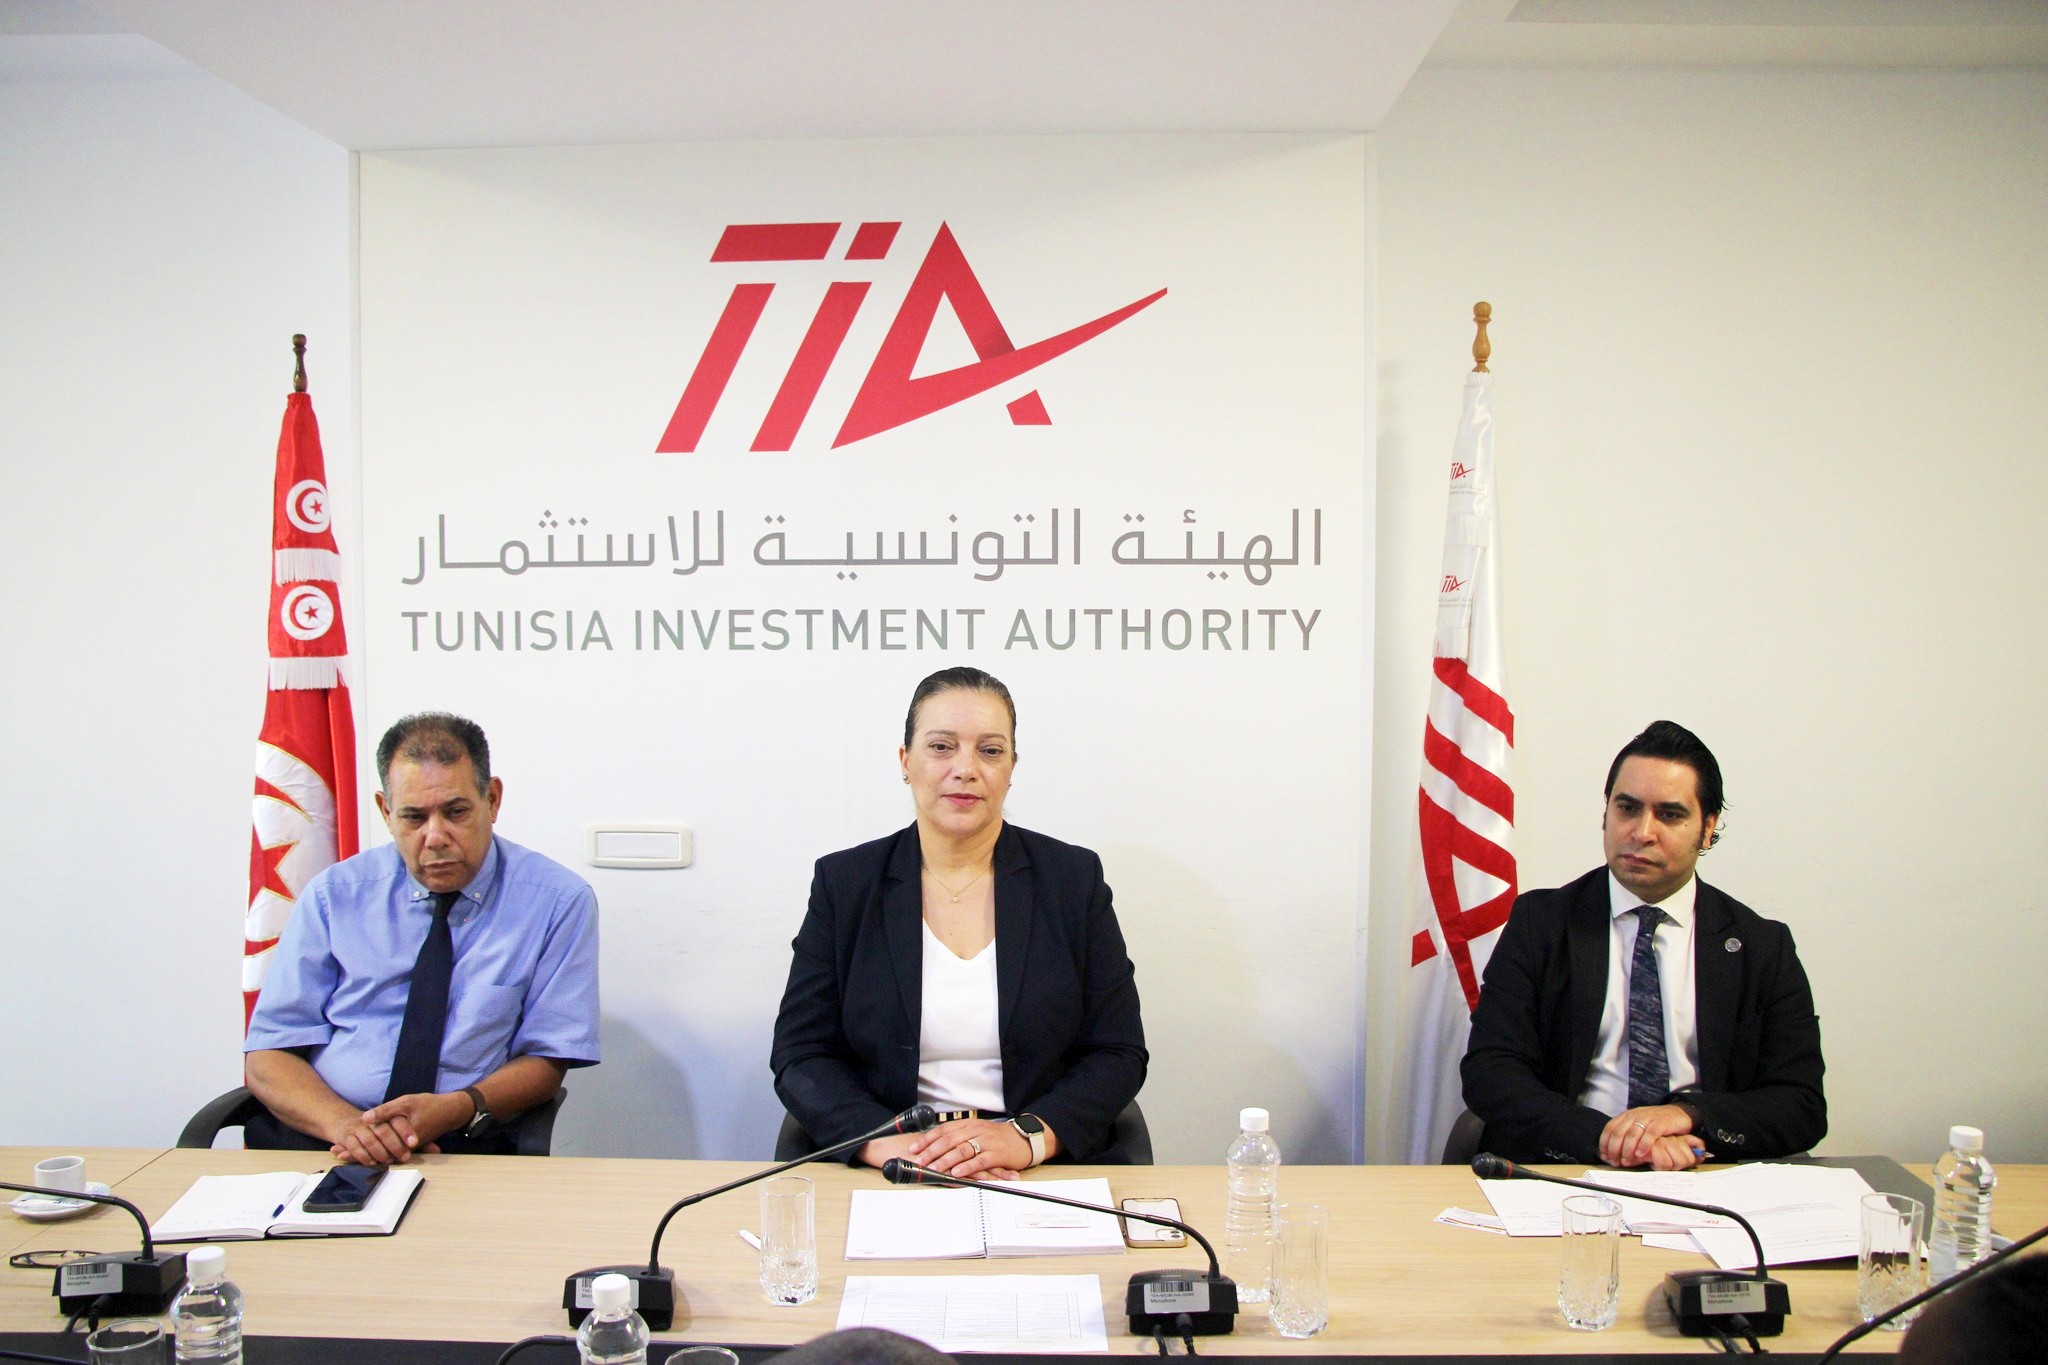 Tunisia Investment Authority welcomed a delegation of Ugandan officials